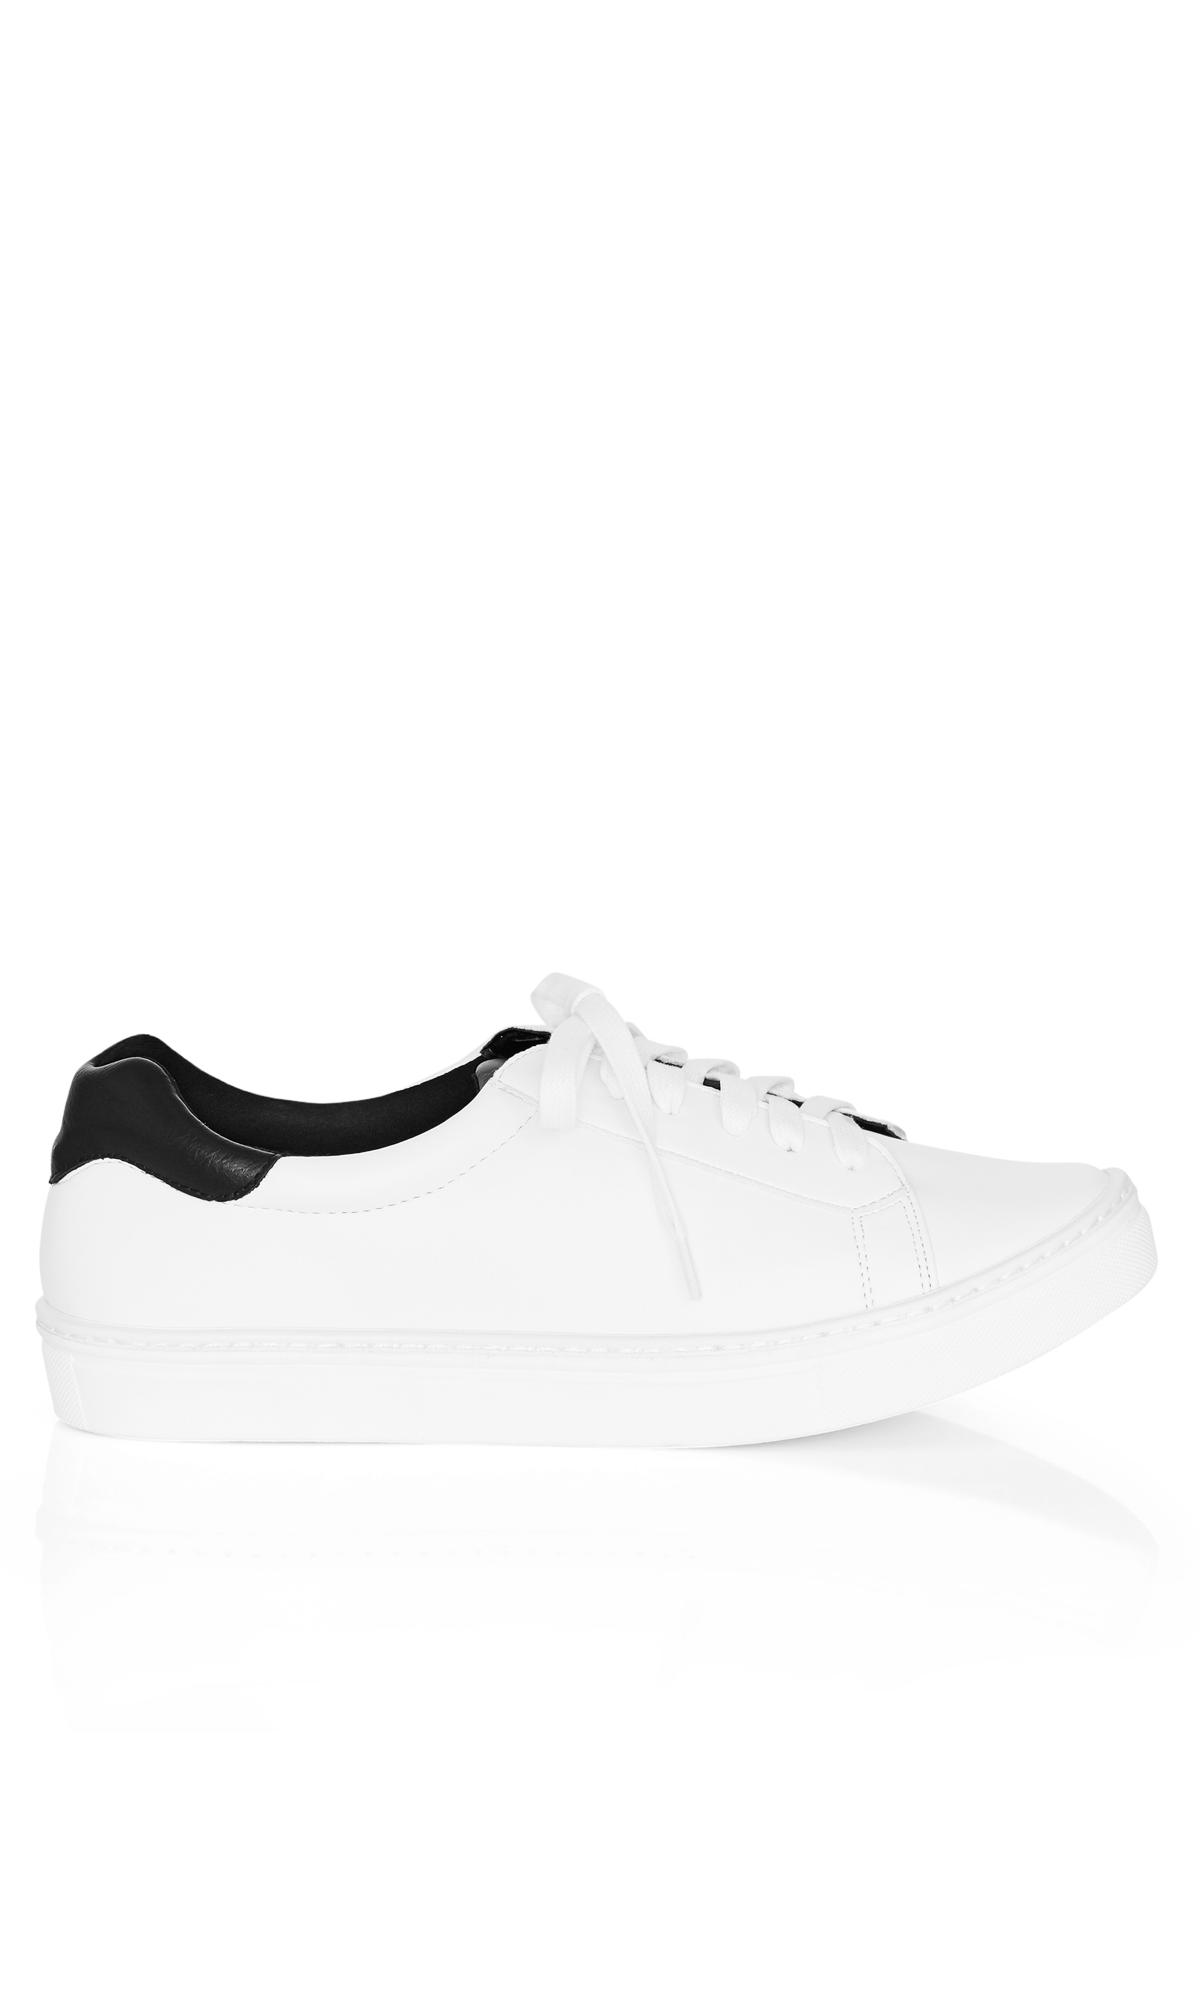 City Chic White & Black WIDE FIT Trainers 3